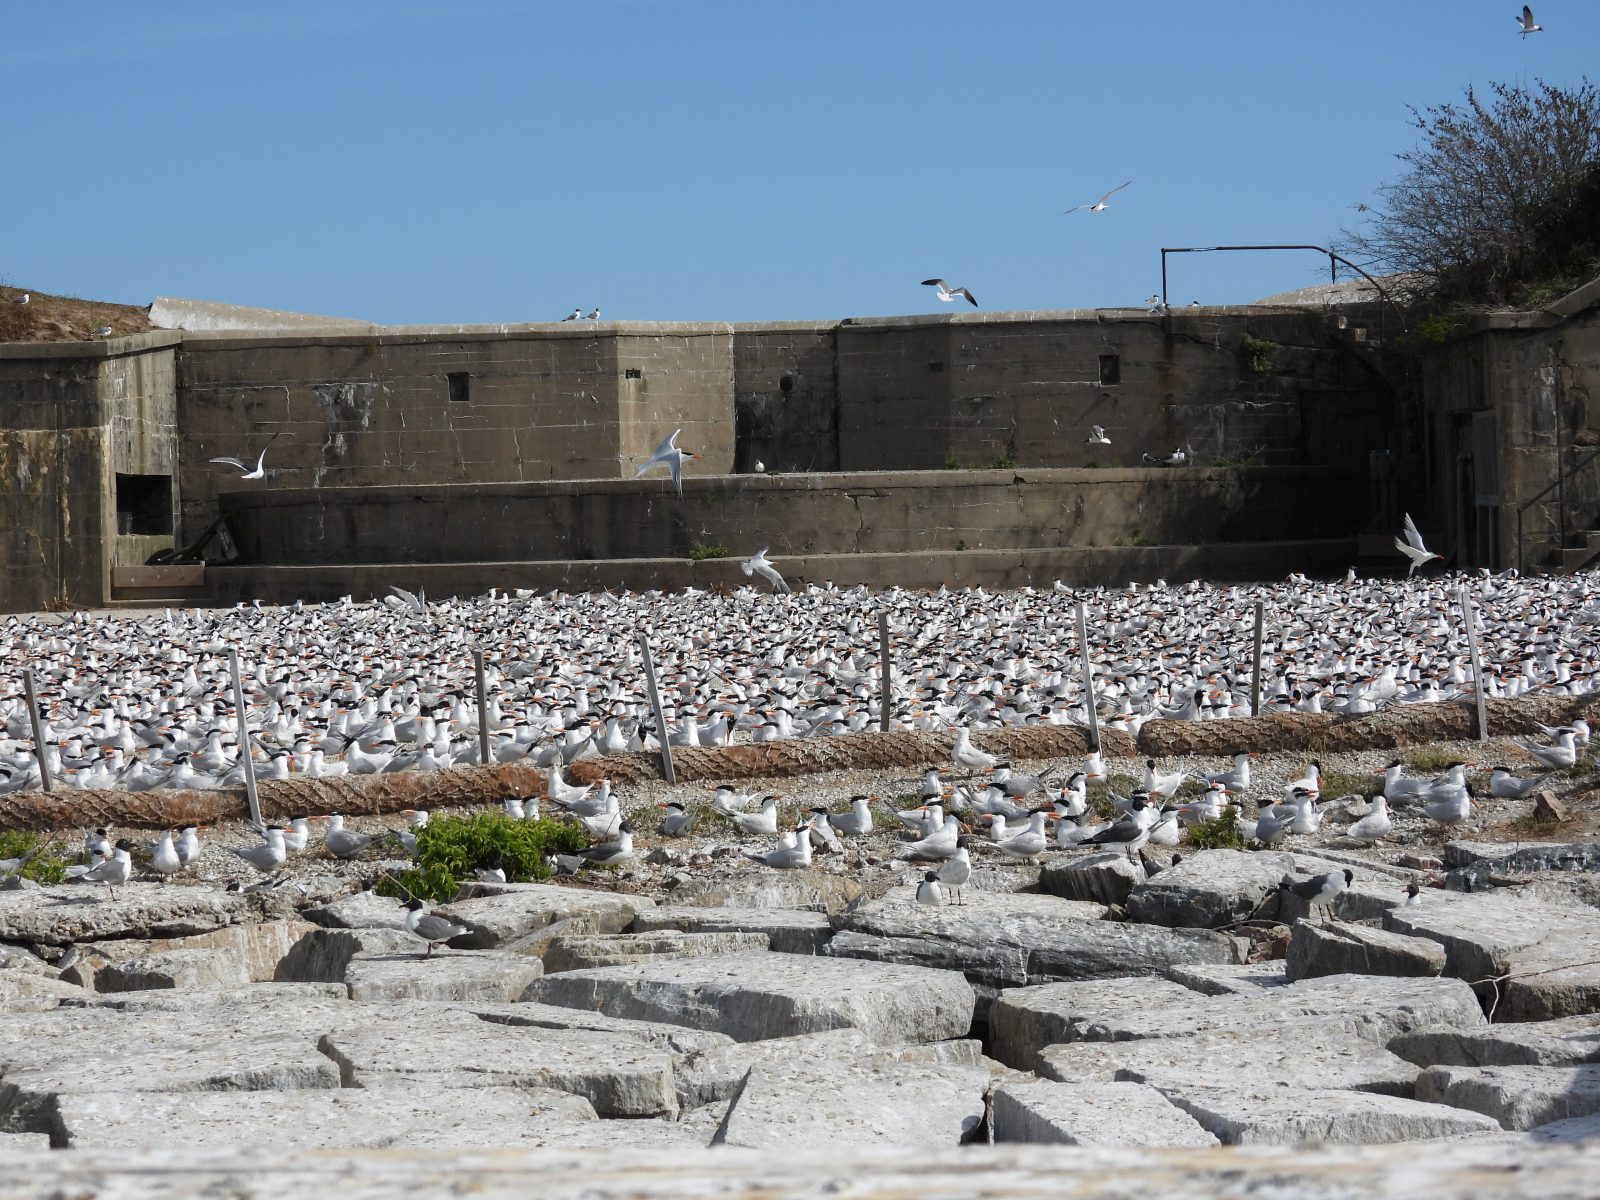 Ground-level look at the nesting royal tern colony on Ft. Wool.